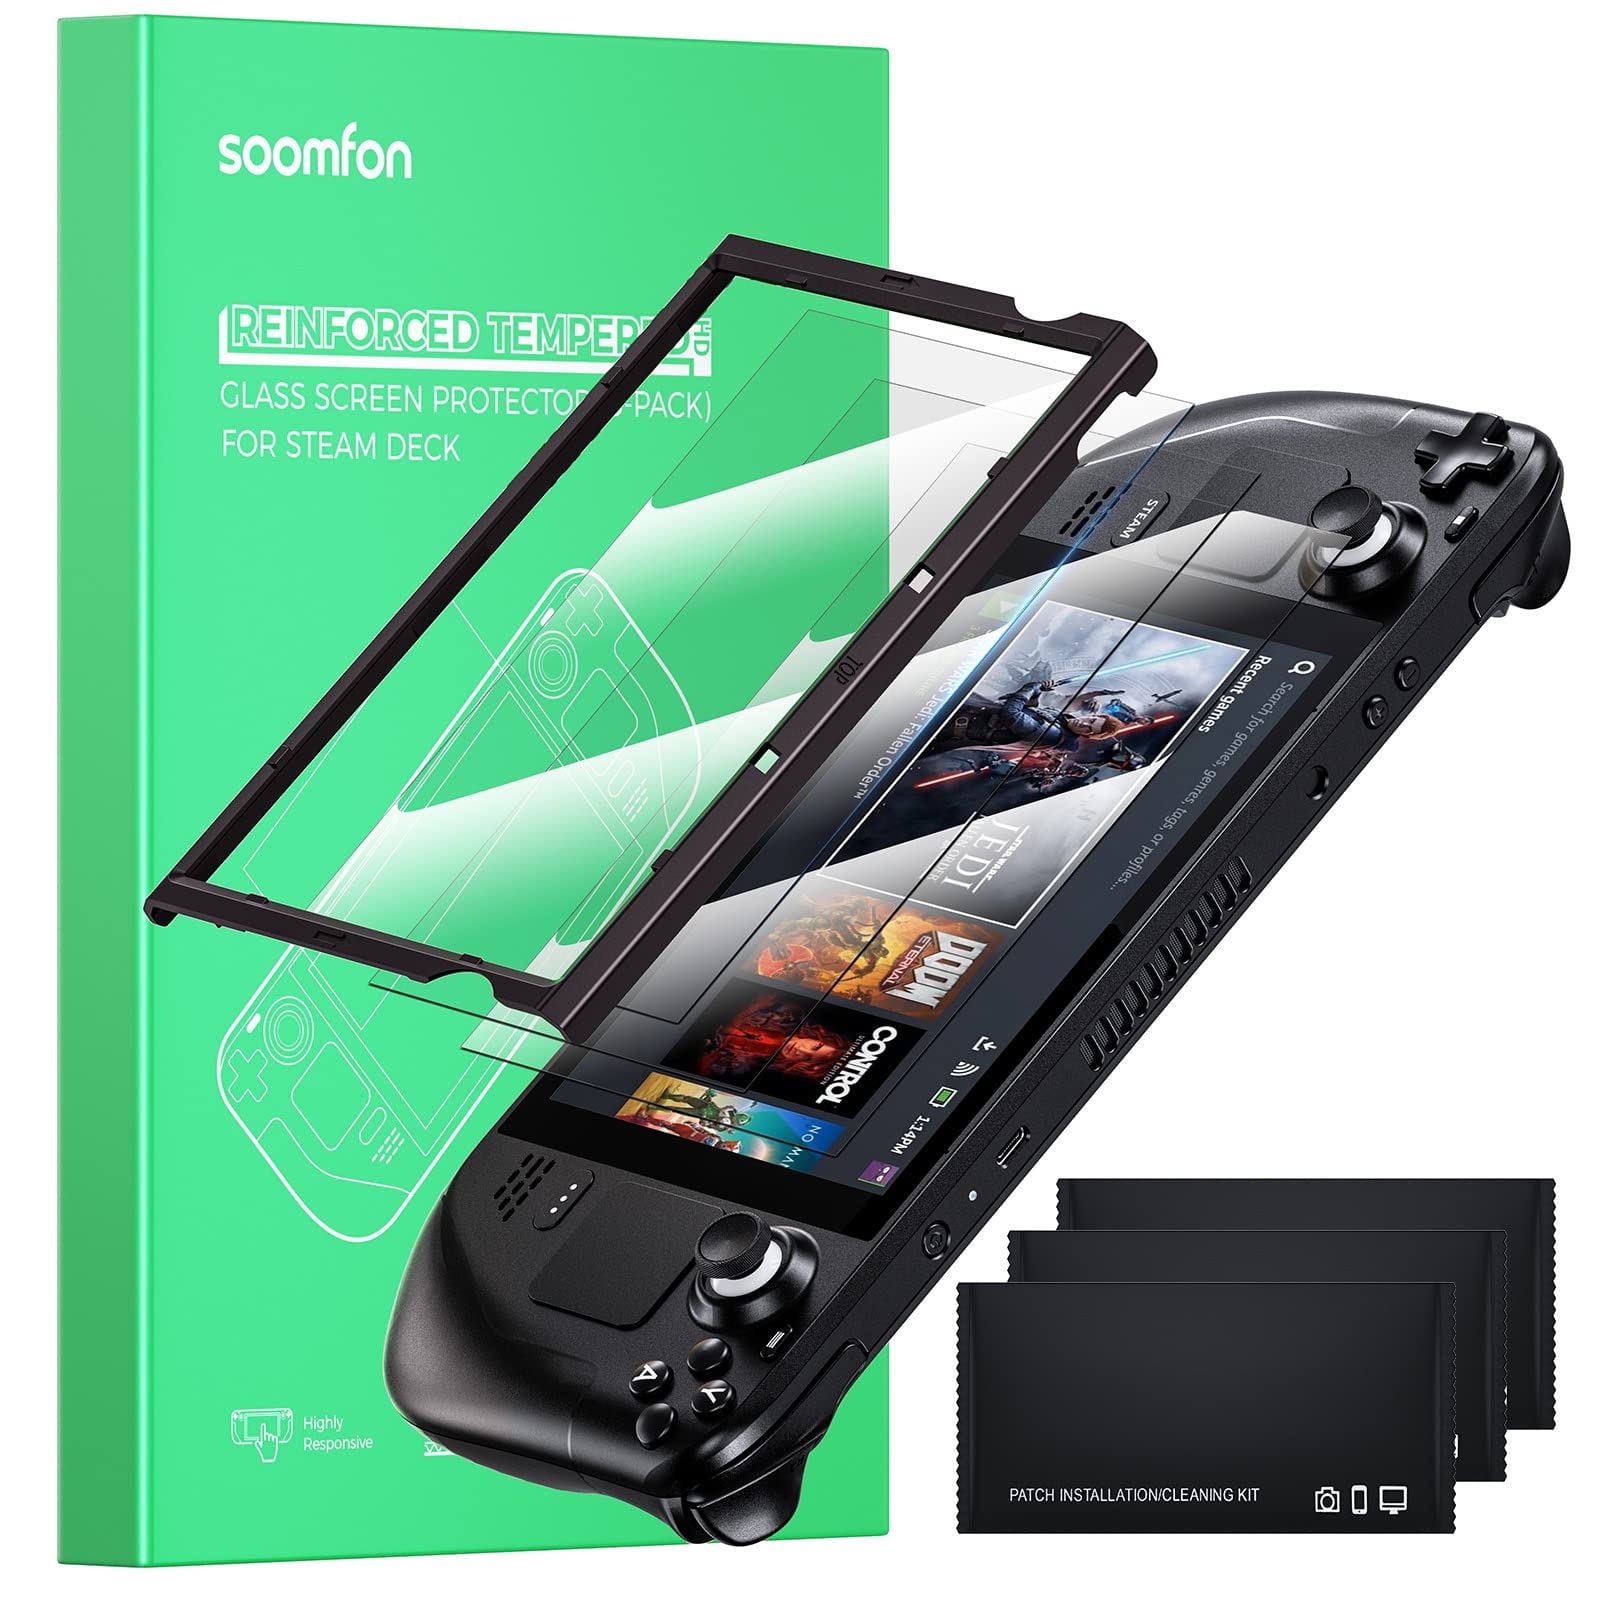 SOOMFON 3 Pack Steam Deck Screen Protector,Ultra HD Glass Protector 9H Hardness ,Come with Toolkits